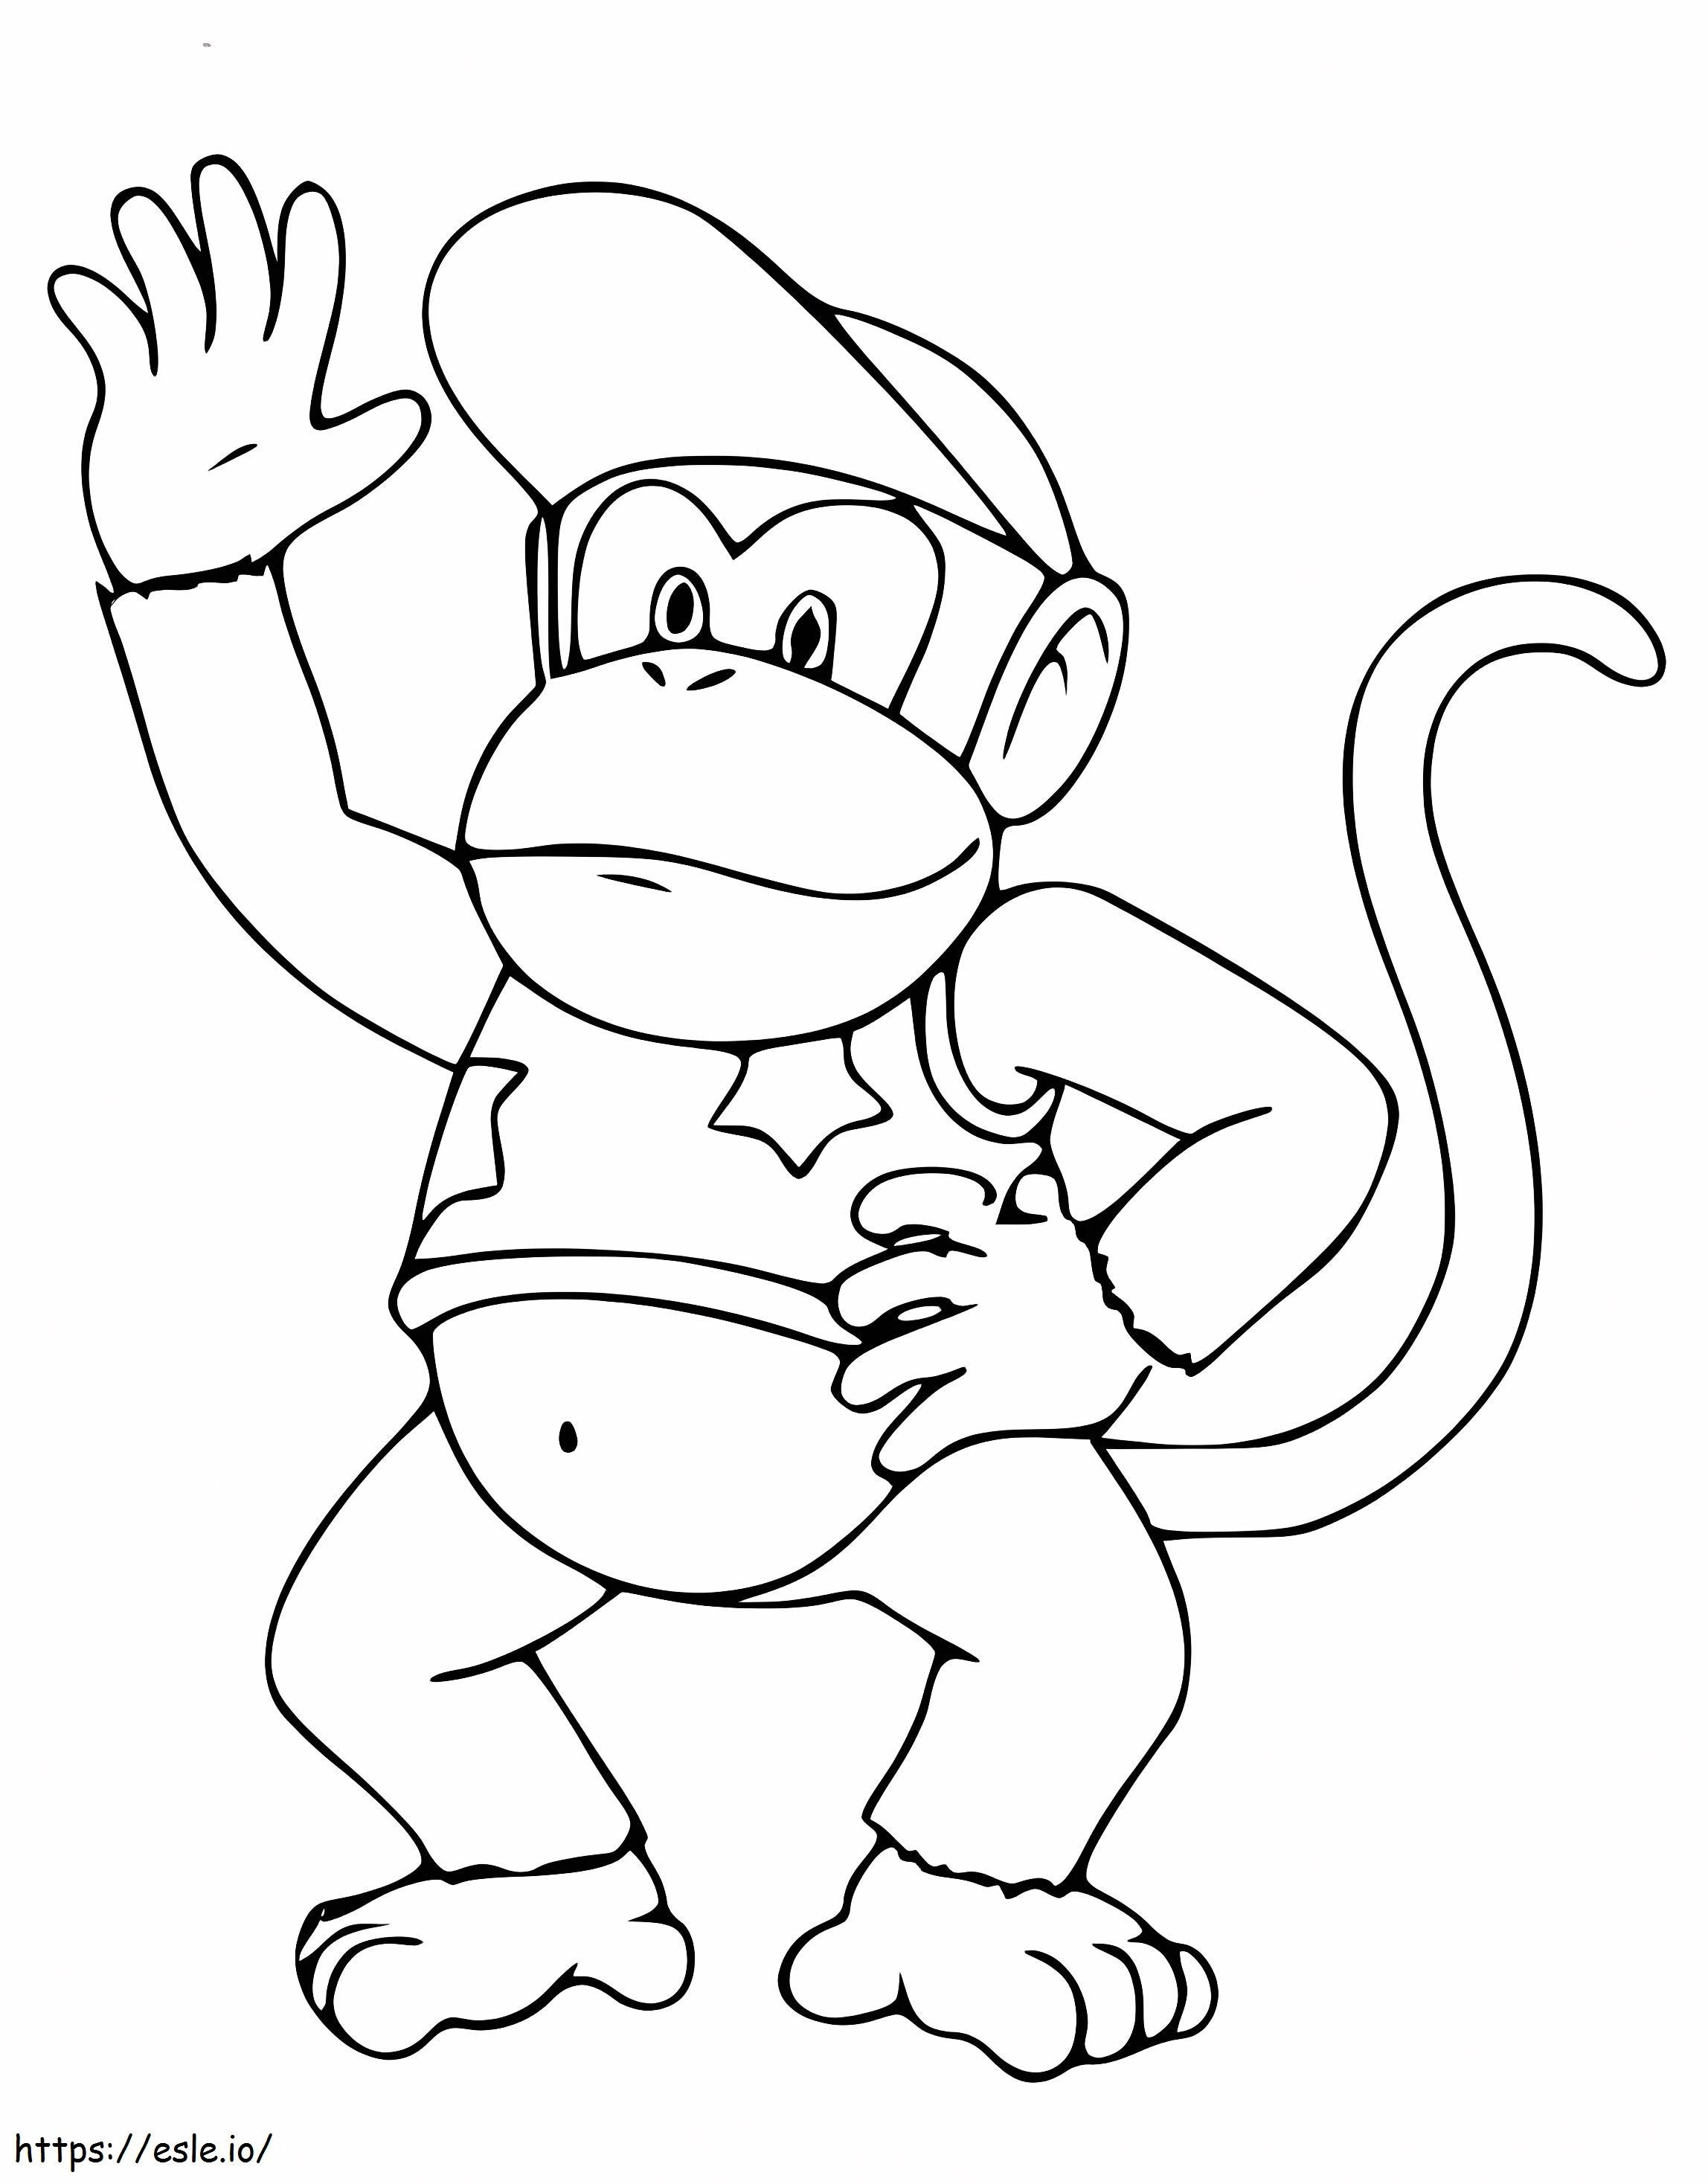 Diddy Kong Smiling coloring page